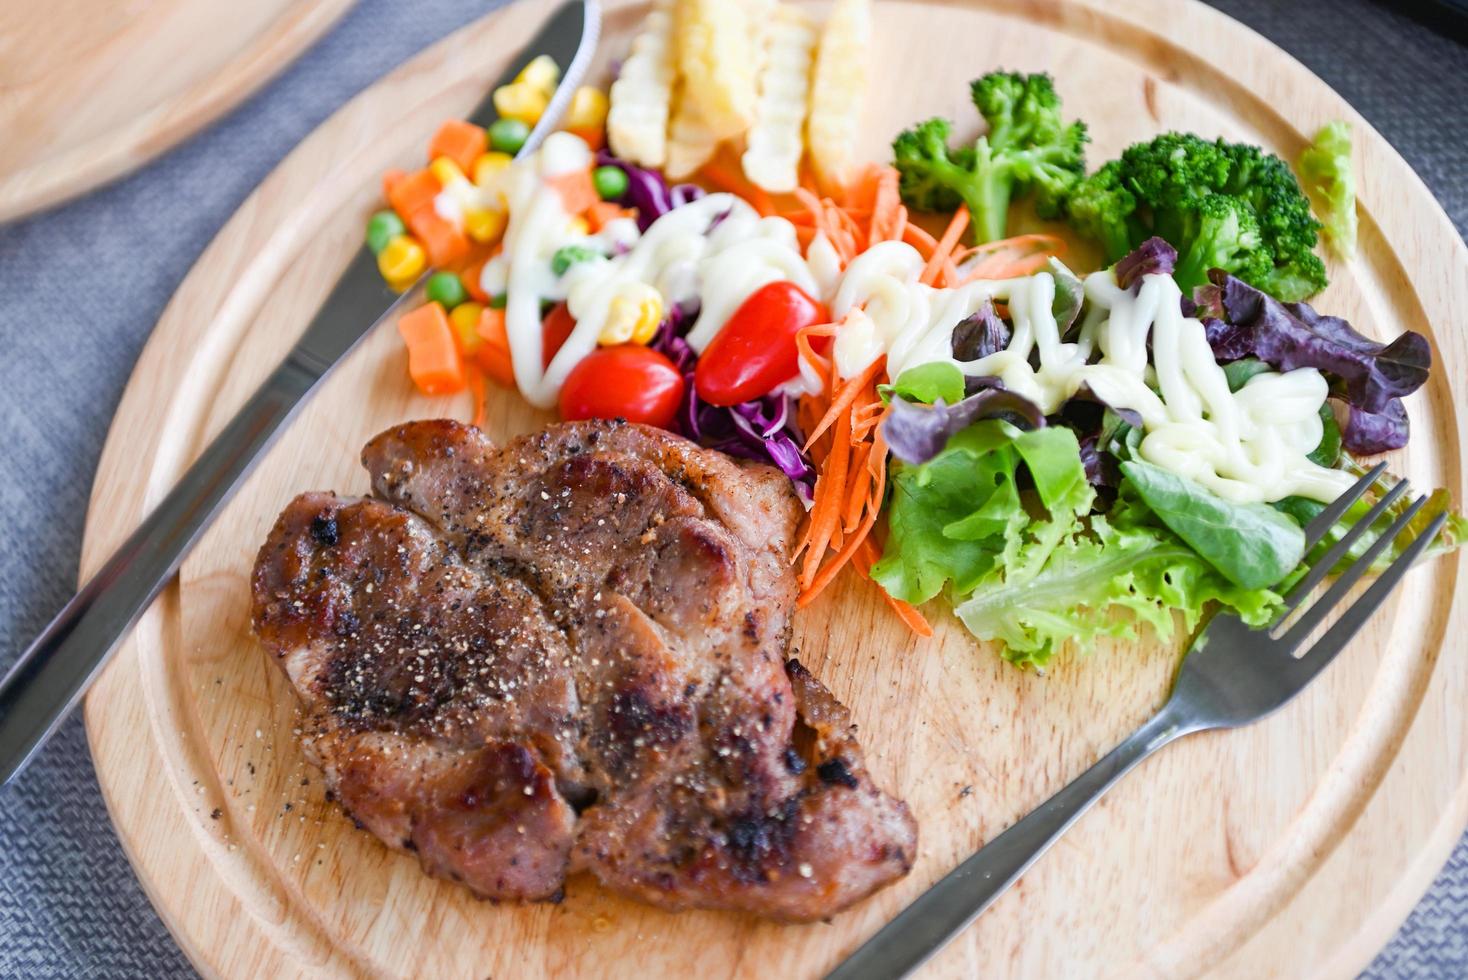 Steak homemade with french fries and fresh vegetable salad on wooden tray, healthy steak menu, Steak pork photo